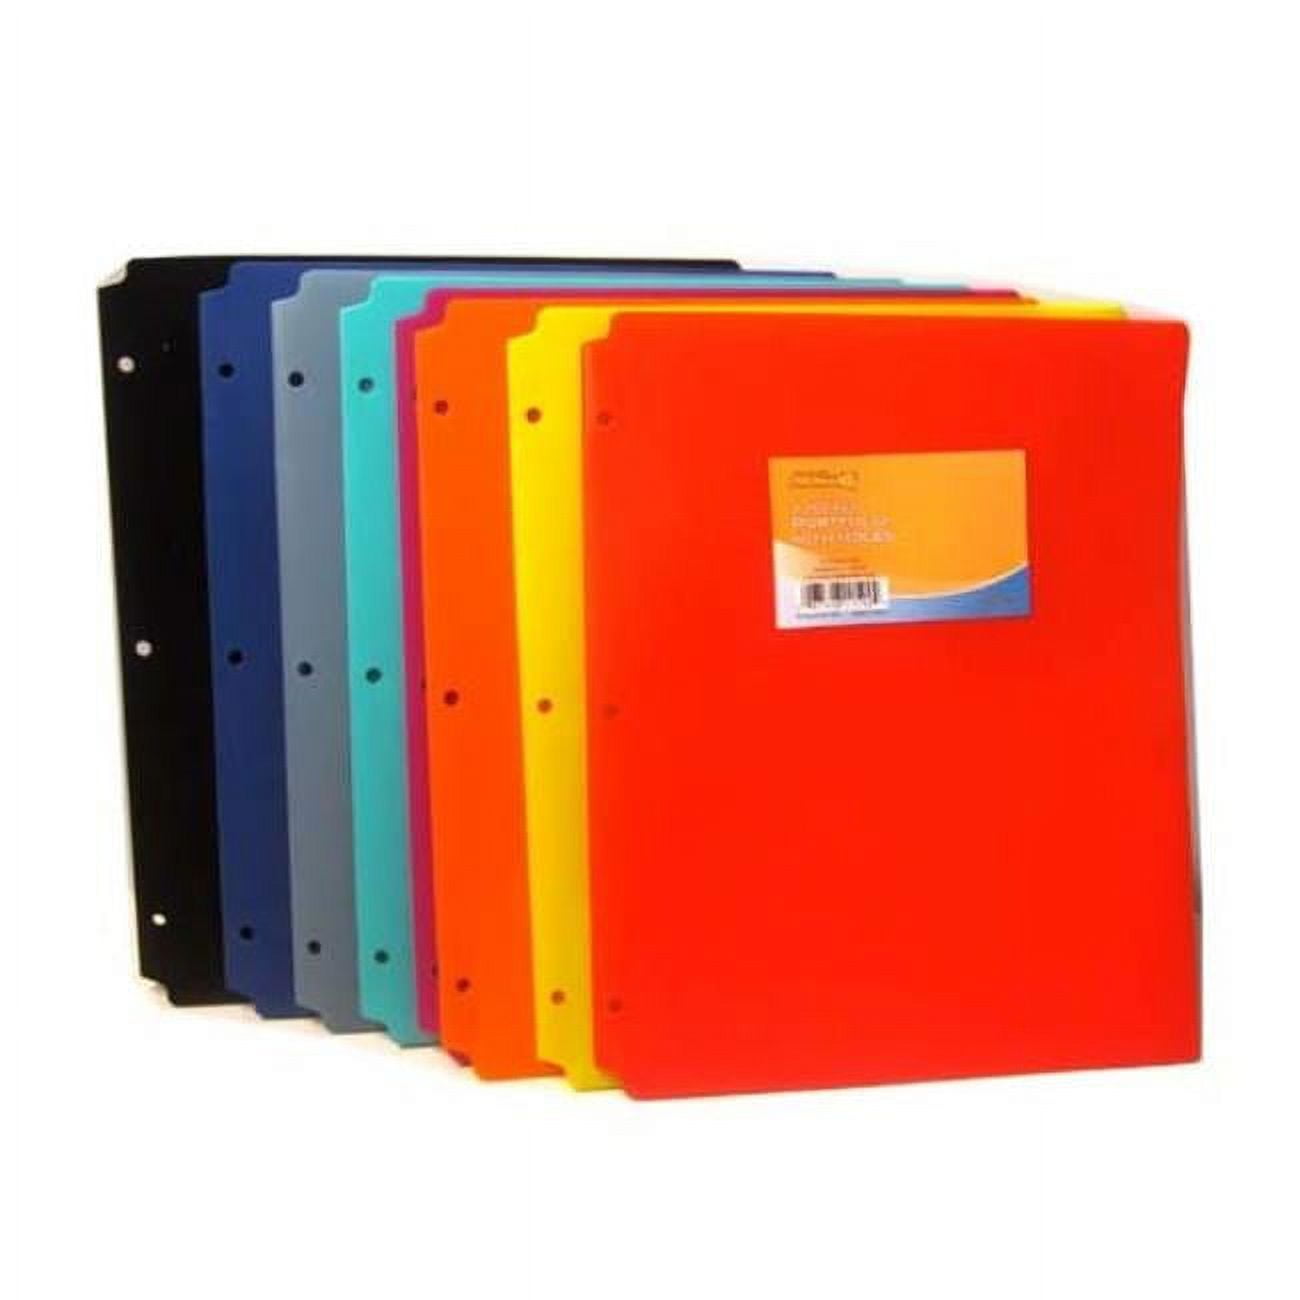 2324661 2 Pocket Portfolio With Prongs, Assorted Color Summer Colors - Case Of 48